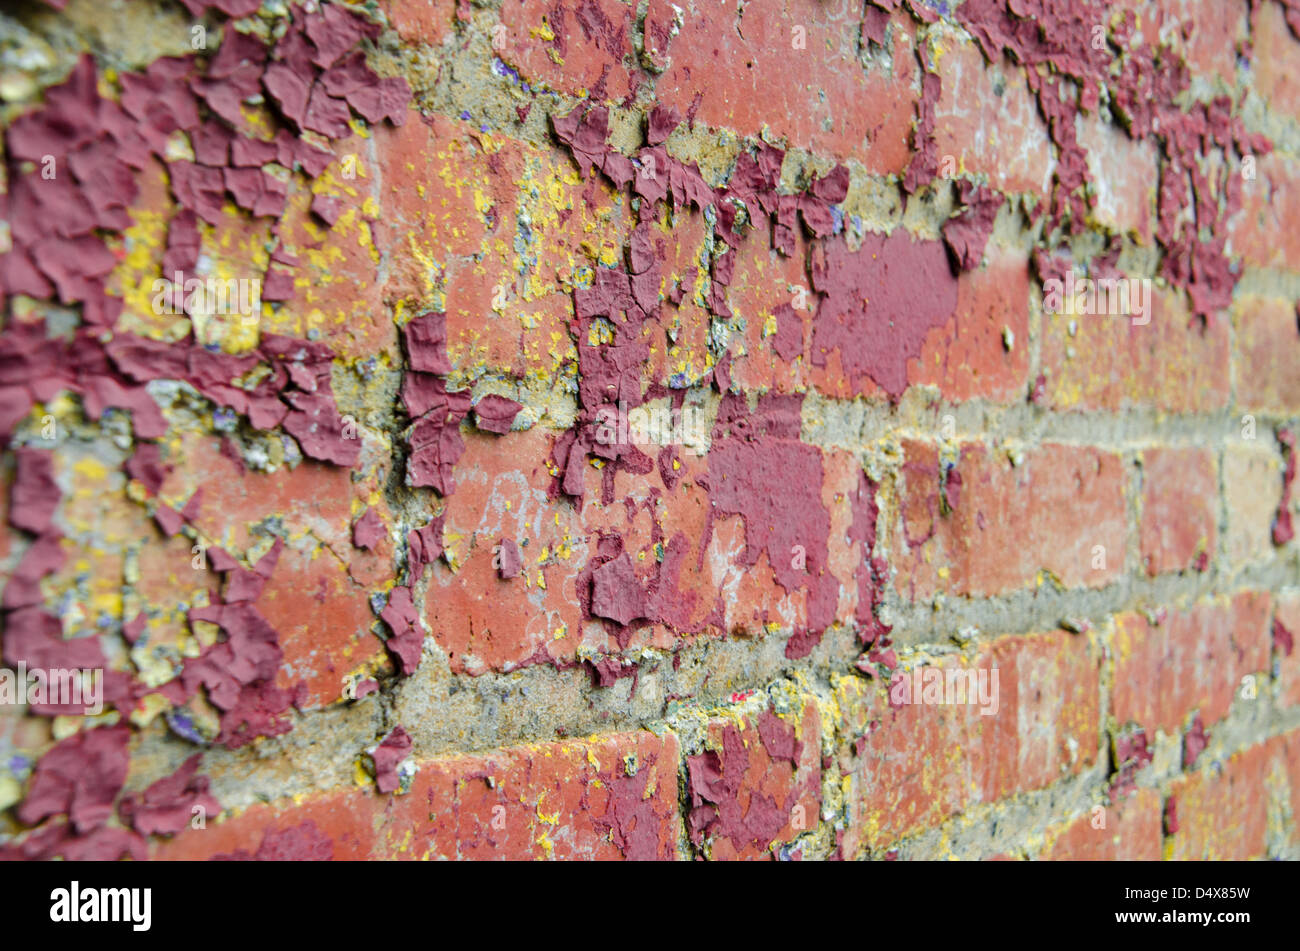 Gritty urban background red brick wall texture with peeling dark red paint and yellow splatters Stock Photo